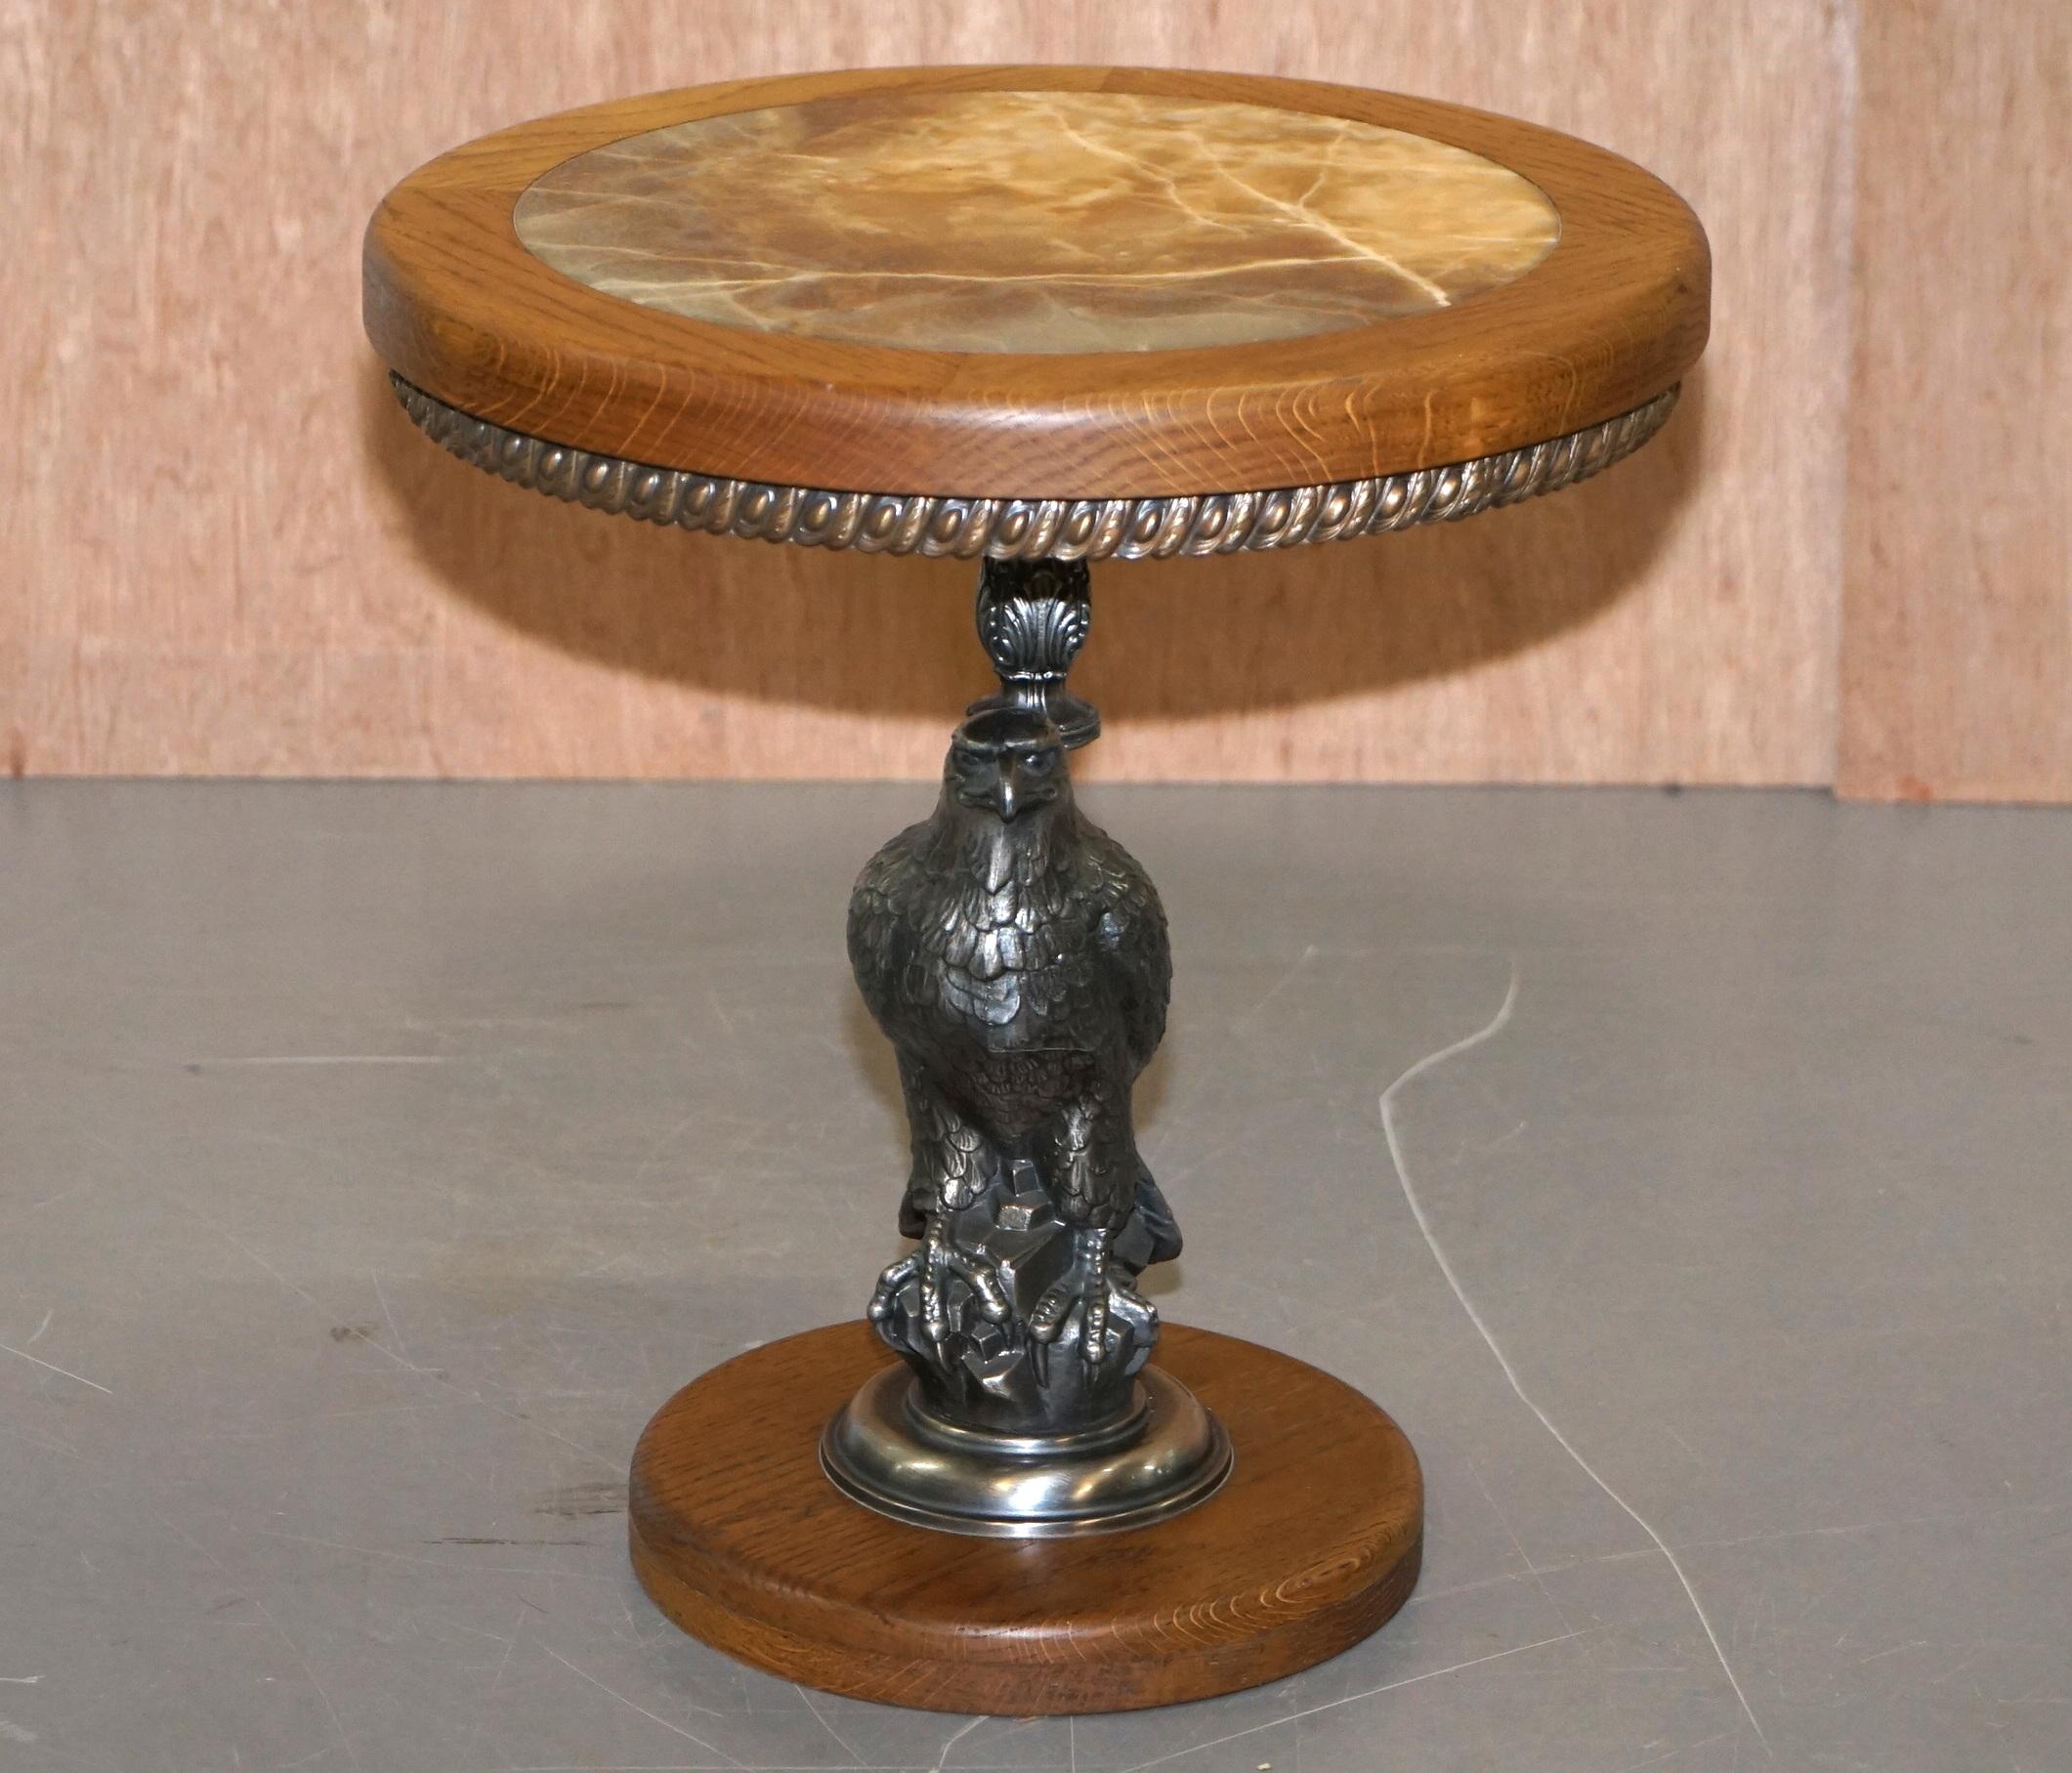 We are delighted to offer for sale this lovely side table with silver plated American Eagle base and marble top with gilt metal decorative trim

A very decorative side table, the eagle has been silver plated to a high standard, the casting is